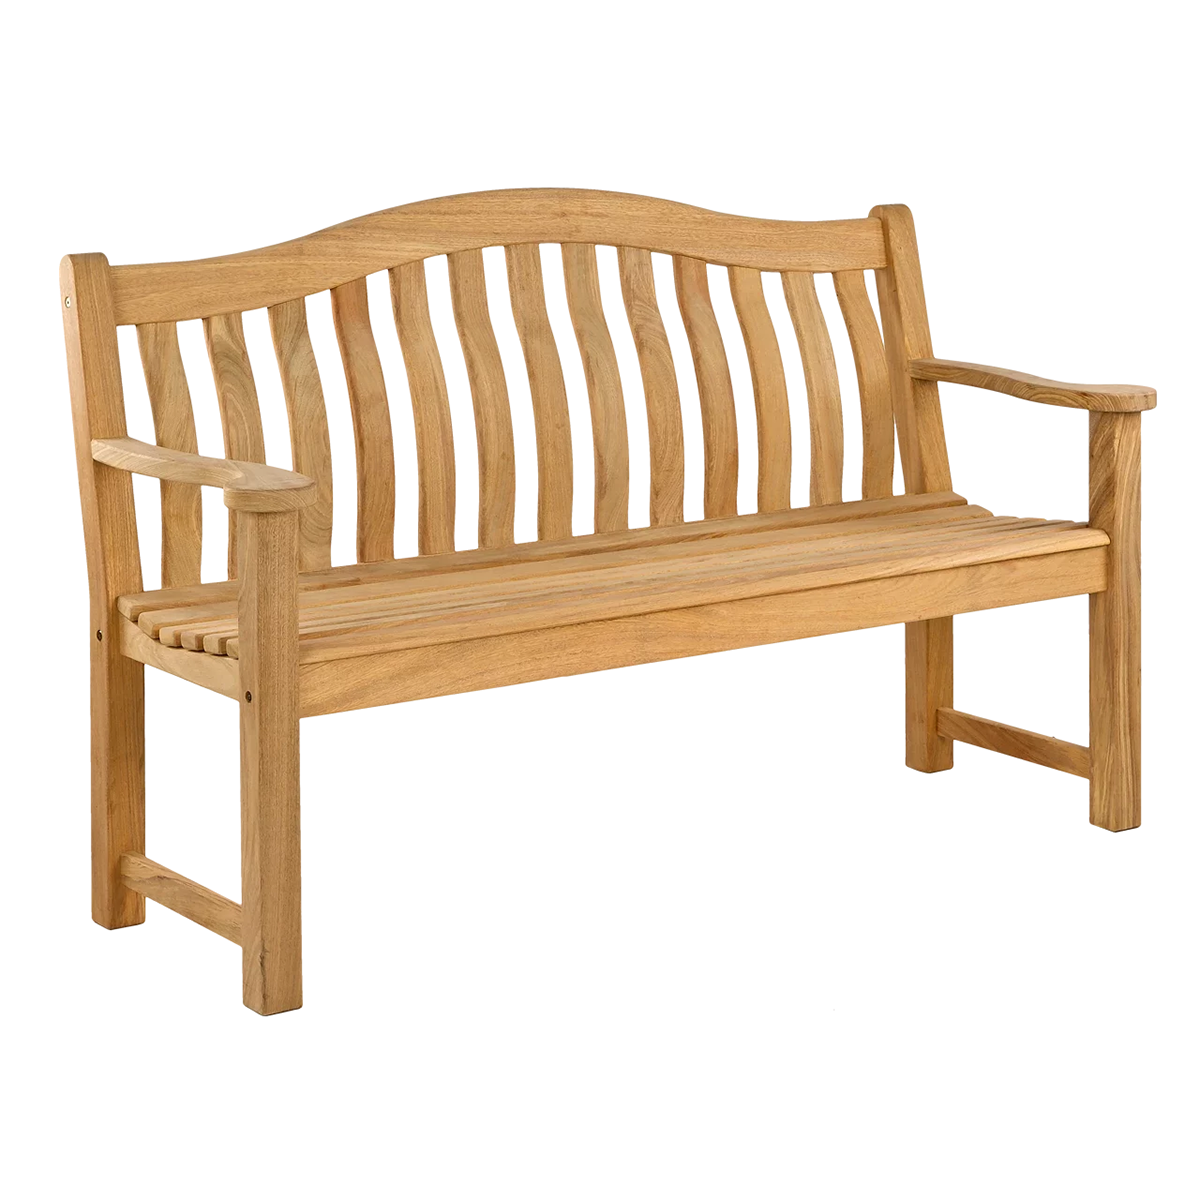 Alexander Rose Turnberry Roble Bench 5ft